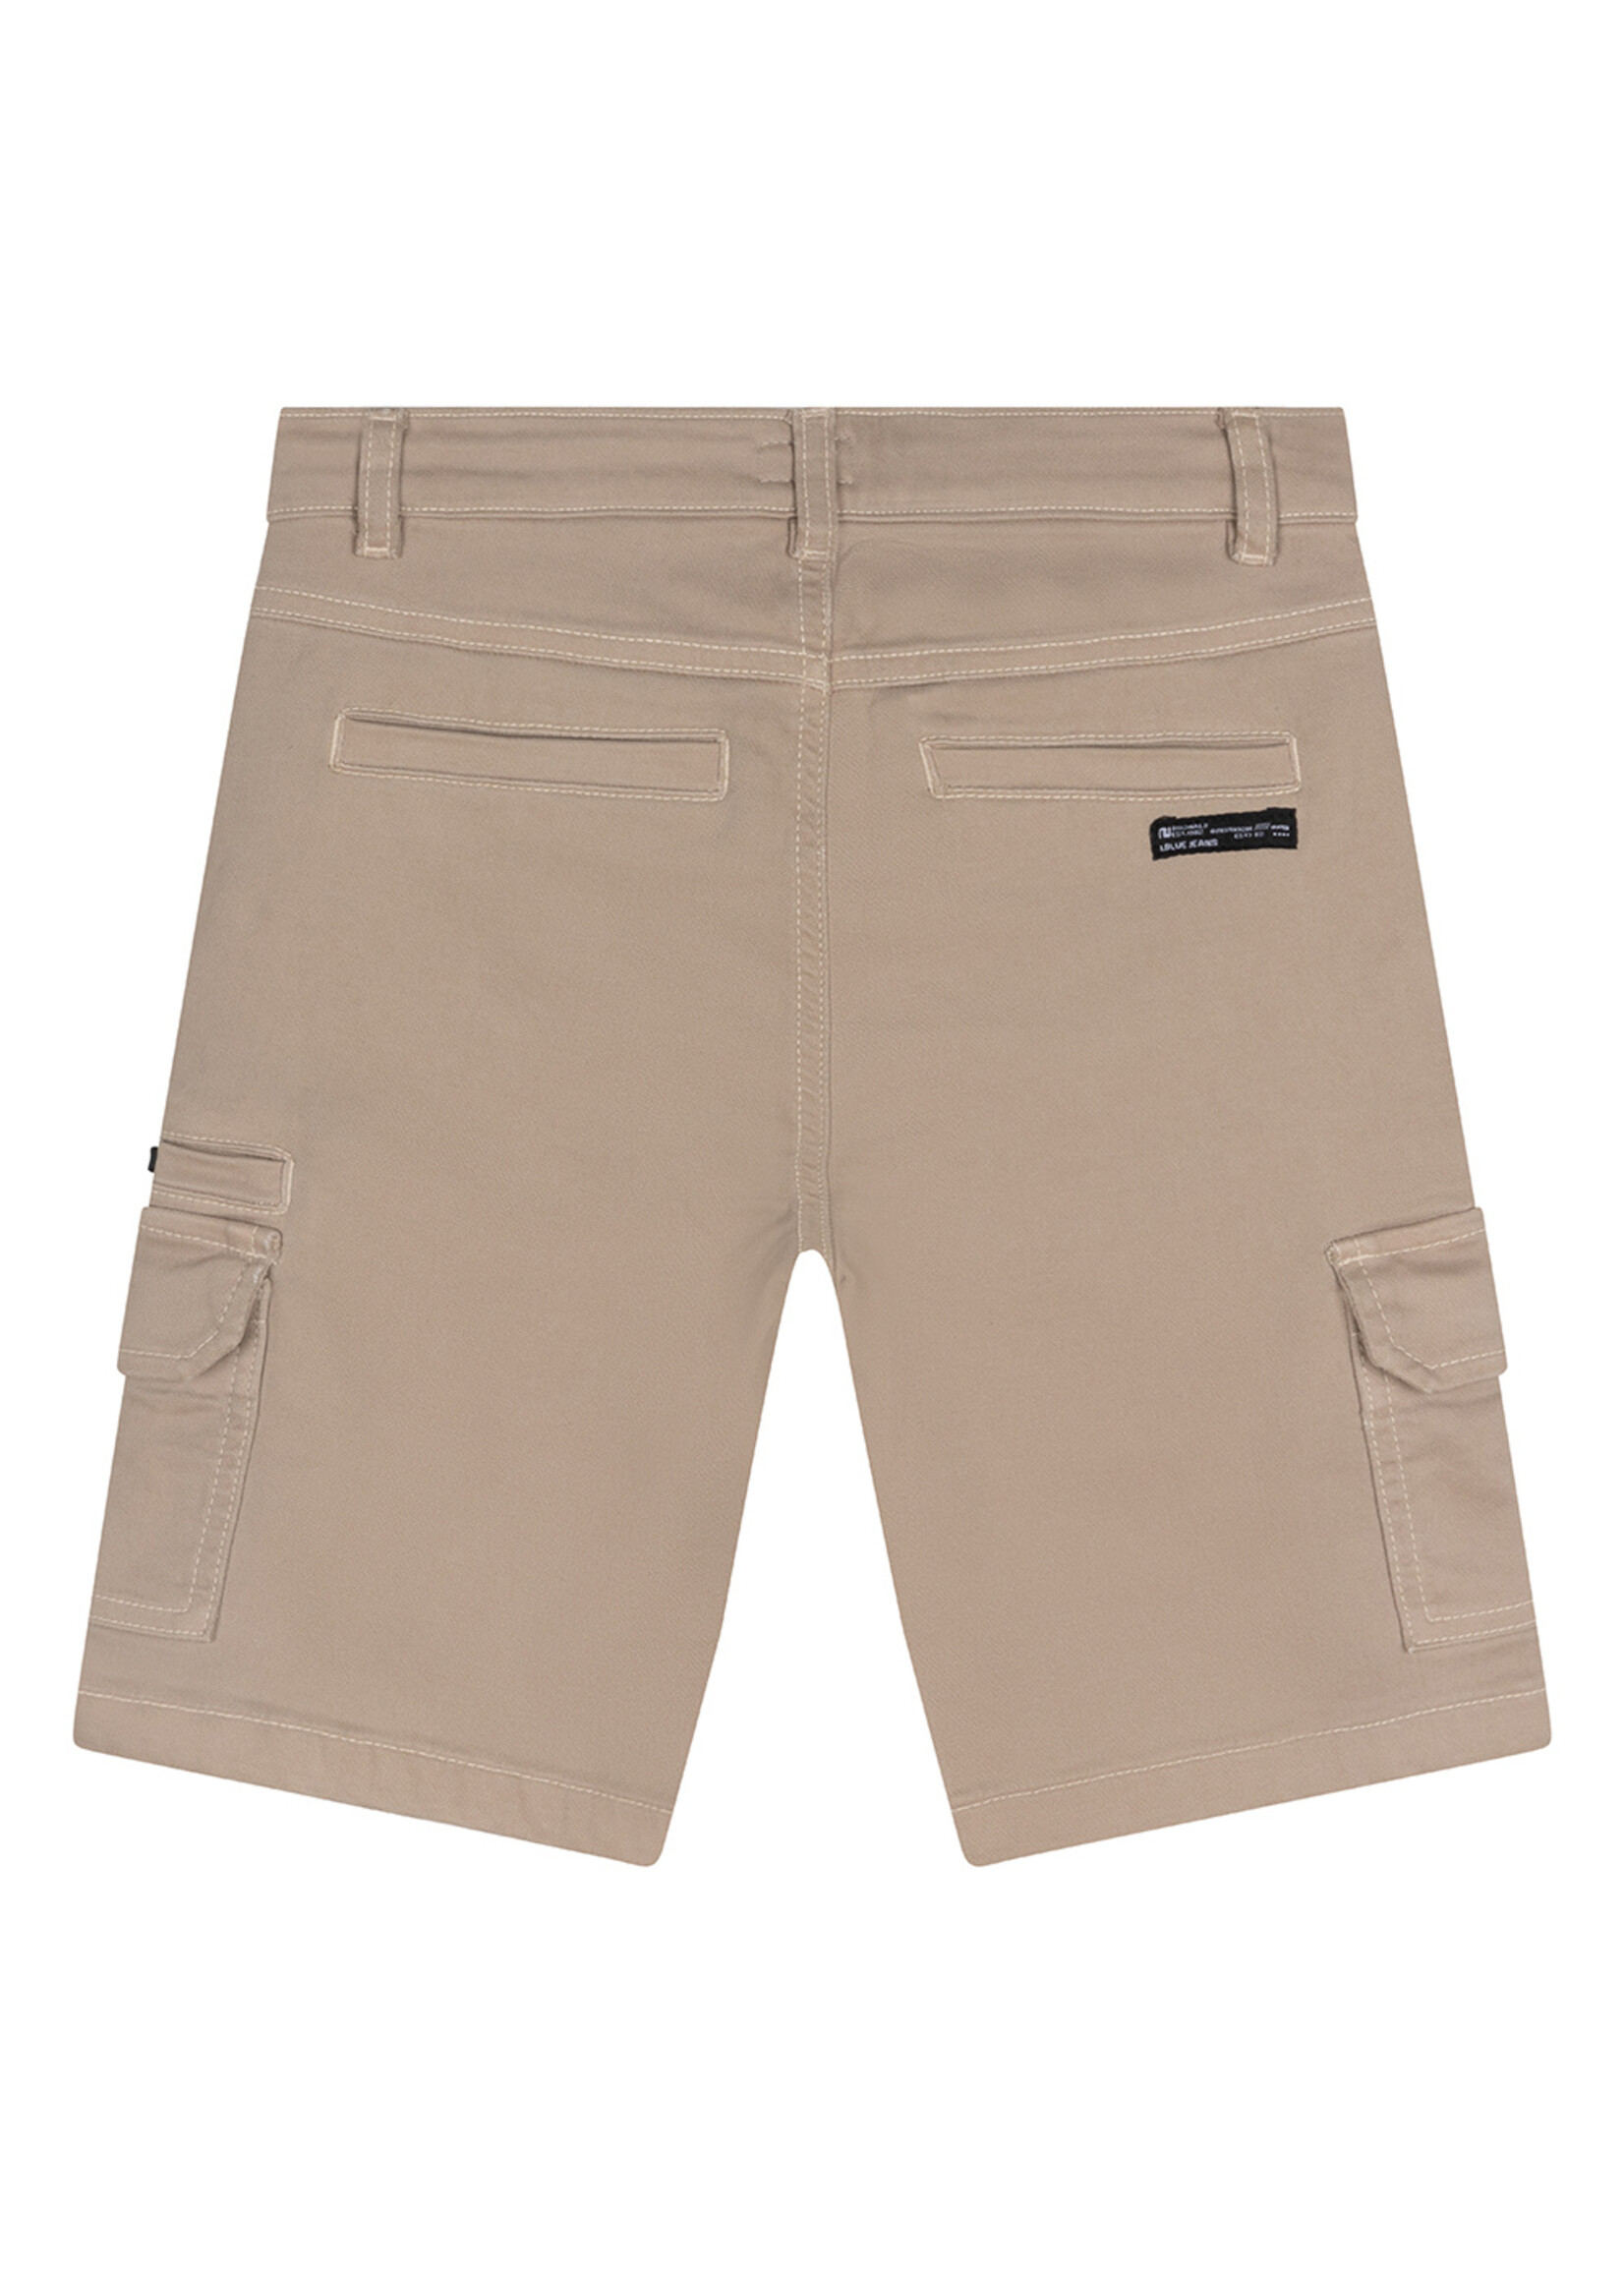 Indian Blue Jeans Cargo Short Indian Stone Sand